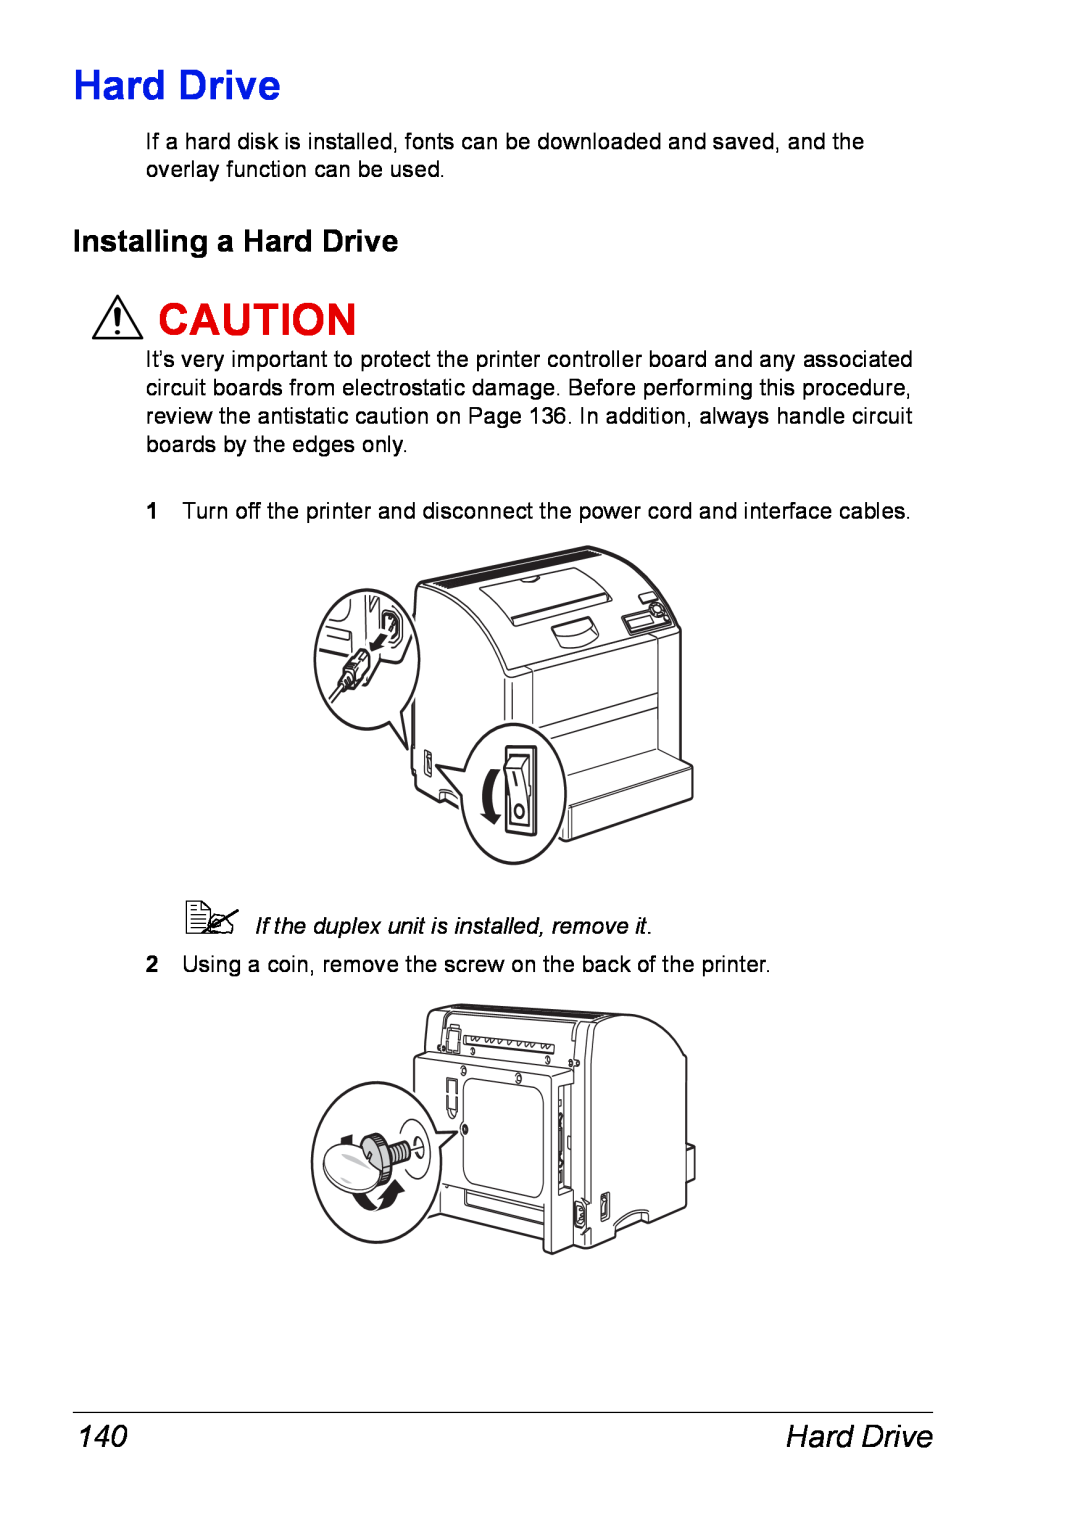 Xerox 6120 manual Installing a Hard Drive,  If the duplex unit is installed, remove it 